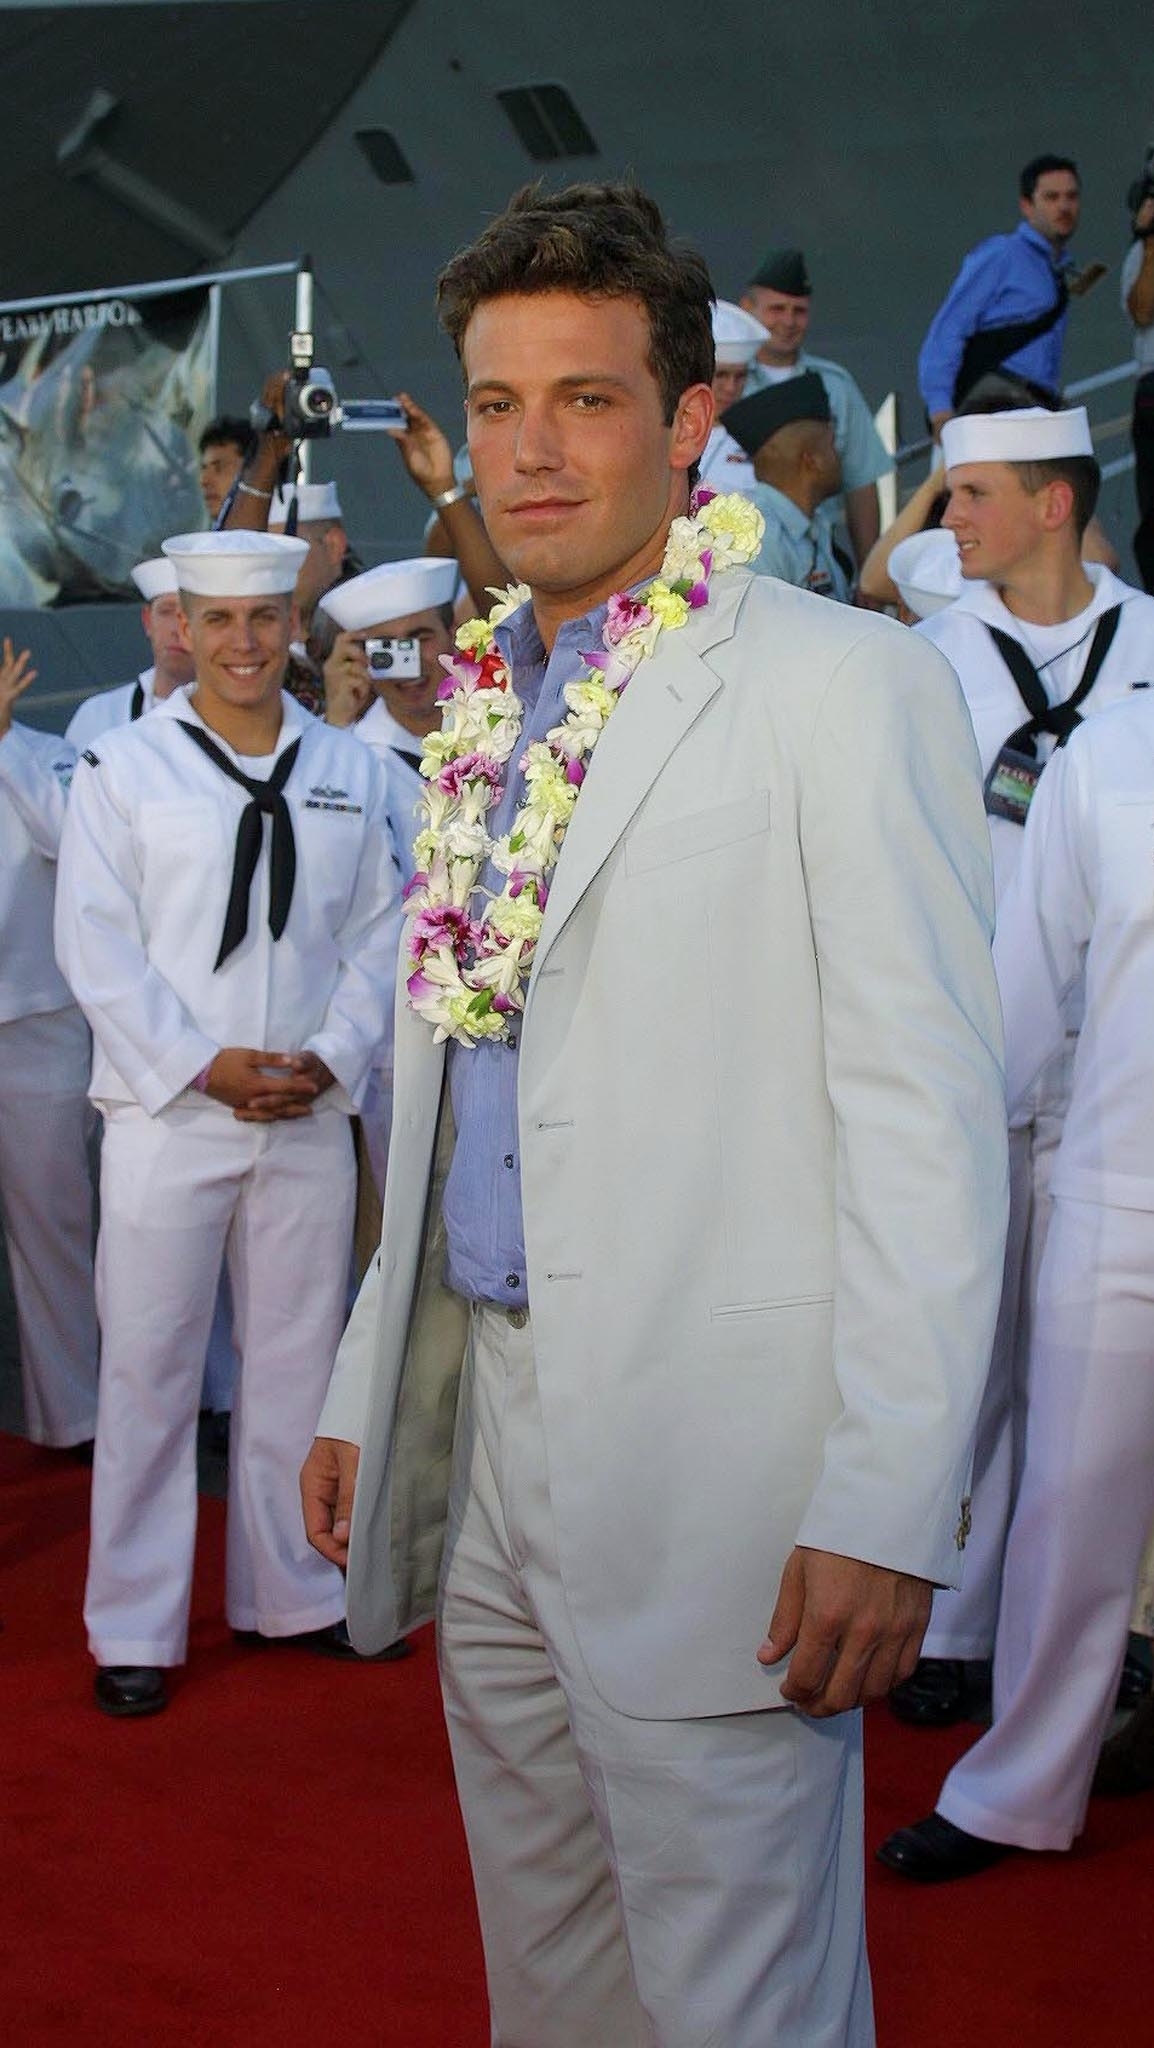 Ben Affleck wearing a lei and a light-colored suit on a red carpet, surrounded by smiling Navy personnel in uniforms